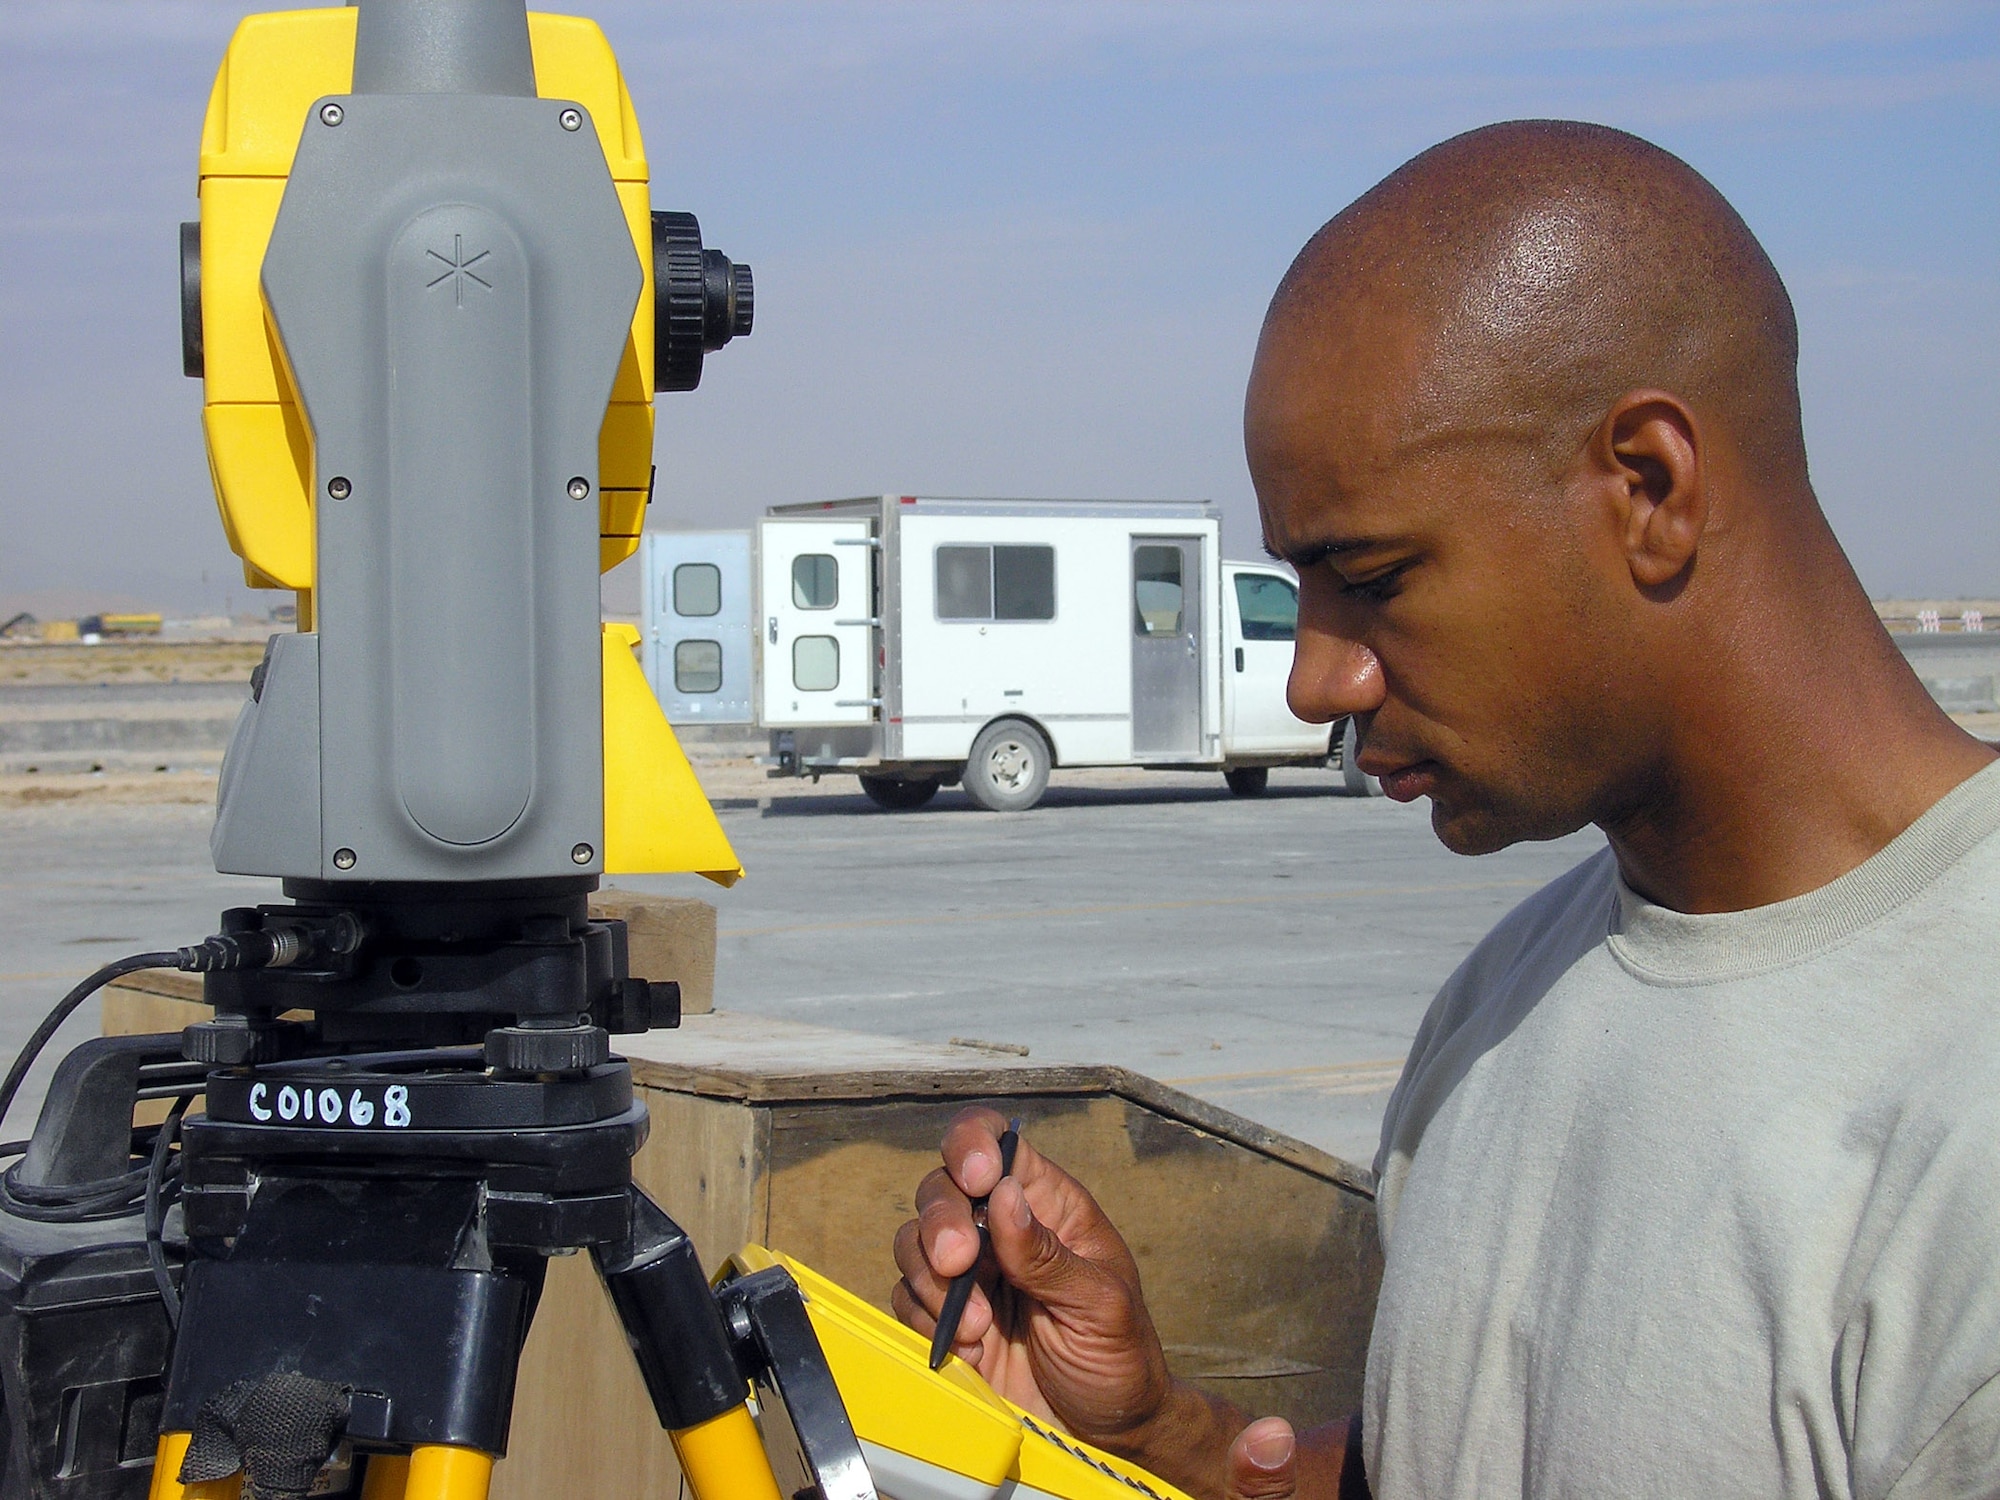 KANDAHAR AIRFIELD, Afghanistan (AFPN) -- Tech. Sgt. Lineus Davis calibrates a geodimeter to survey work being done on the flightline here. Sergeant Davis is an engineering assistant craftsman with the 451st Air Expeditionary Group civil engineer flight. He is from Wilmington, N.C., and deployed from Pope Air Force Base, N.C. (U.S. Air Force photo by Tech. Sgt. Virgil McGee)